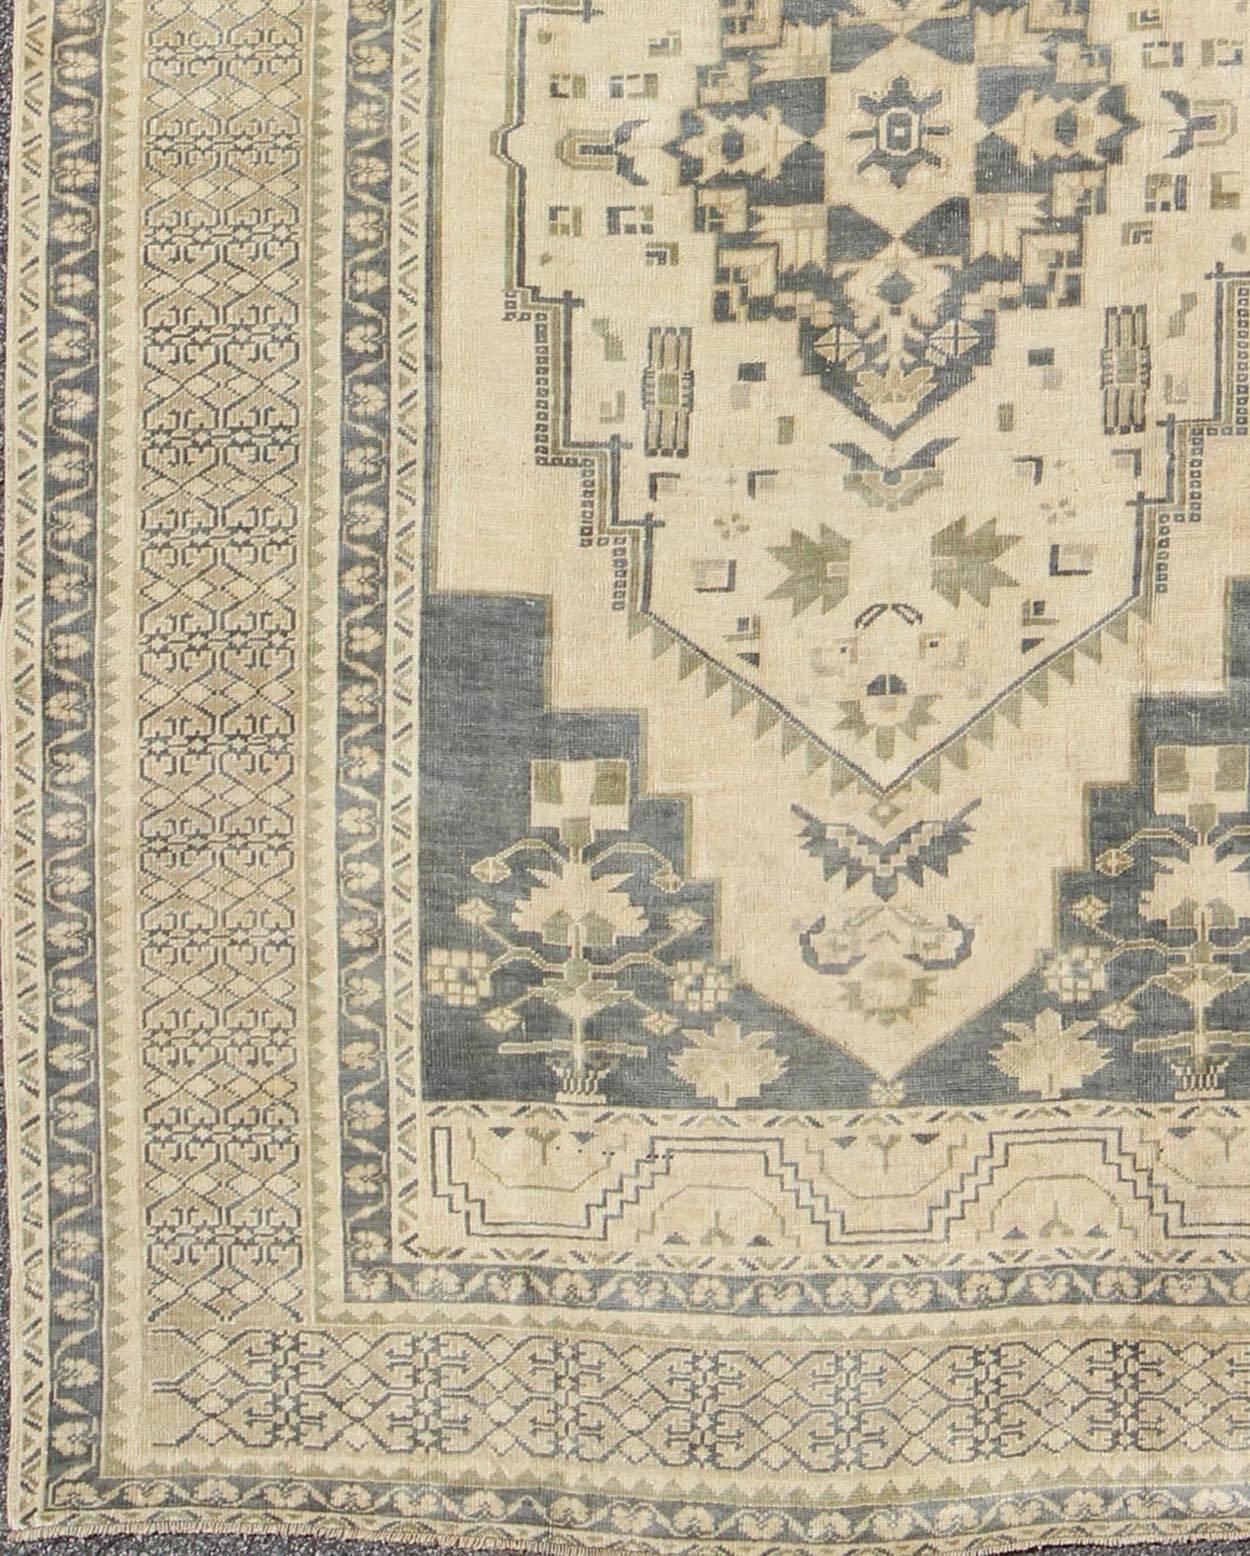 Dark grey blue and cream mid-20th century Turkish Oushak rug with medallion, cornices, rug en-227, country of origin / type: Turkey / Oushak, circa 1940

This beautiful vintage rug from mid-20th century Turkey features a intricate design, which is